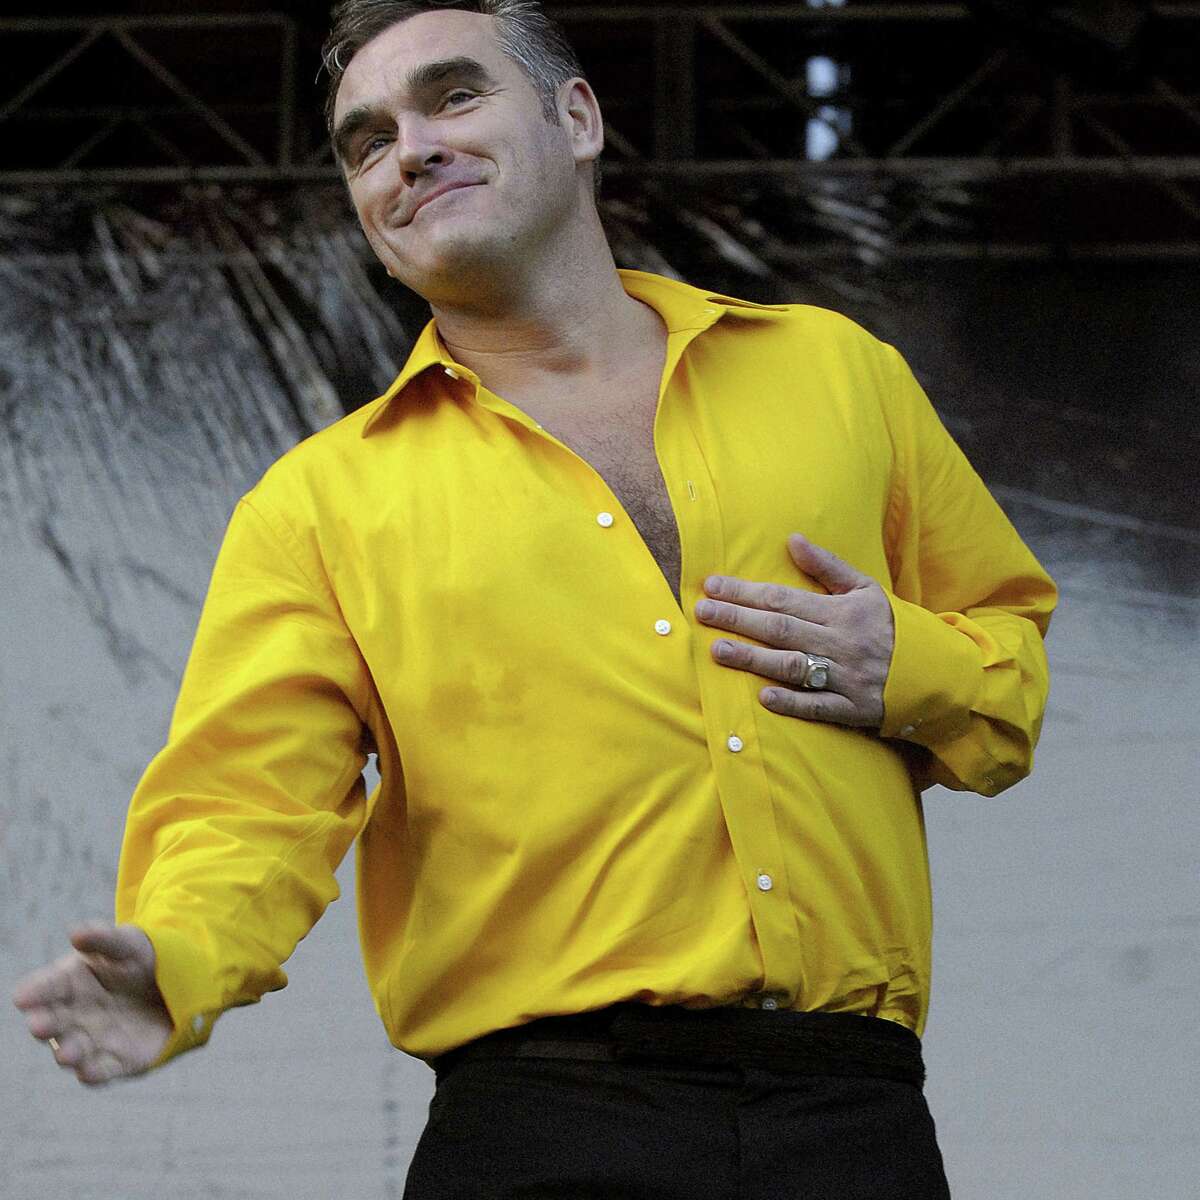 Maybe the third time will be the charm. British rock icon and former Smiths front man Morrissey is set for a makeup date Wednesday after having to cancel two San Antonio shows last year. A Nov. 16 Tobin Center concert was axed when keyboardist Gustavo Manzur collapsed before a show two days earlier in Colorado. A Dec. 17 makeup date at the Majestic Theatre was announced — and canceled — due to management and cash flow issues, Morrissey said in a statement on his website. If this date happens, it should be a good one: at a recent concert in Mexico, Morrissey sprinkled a few Smiths songs in a setlist great solo songs such as "Everyday is Like Sunday," "Sudehead" and "First of the Gang to Die" 7:30 p.m. Wednesday, Tobin Center for the Performing Arts, 100 Auditorium Circle. Sold out. 210-223-8624, tobi.tobincenter.org  -- Jim Kiest